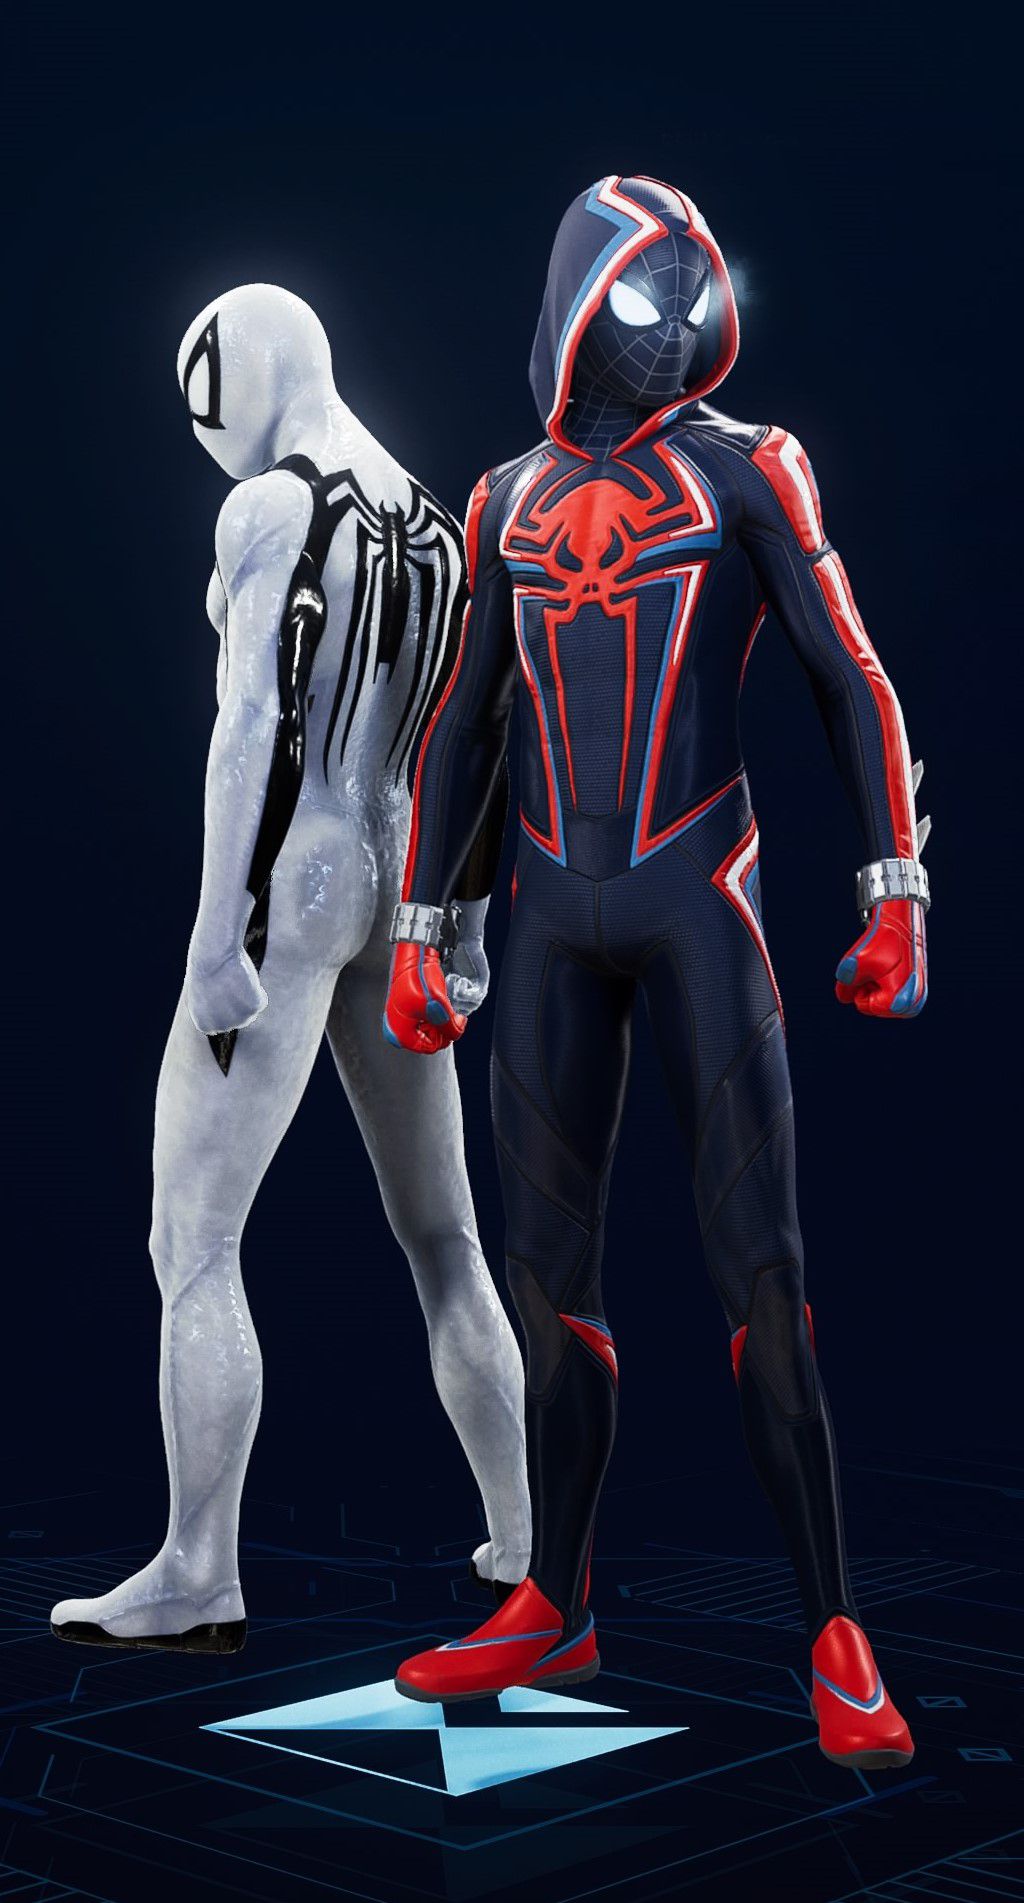 Miles Morales stands in his Miles Morales 2099 Suit in the suit selection screen of Spider-Man 2.